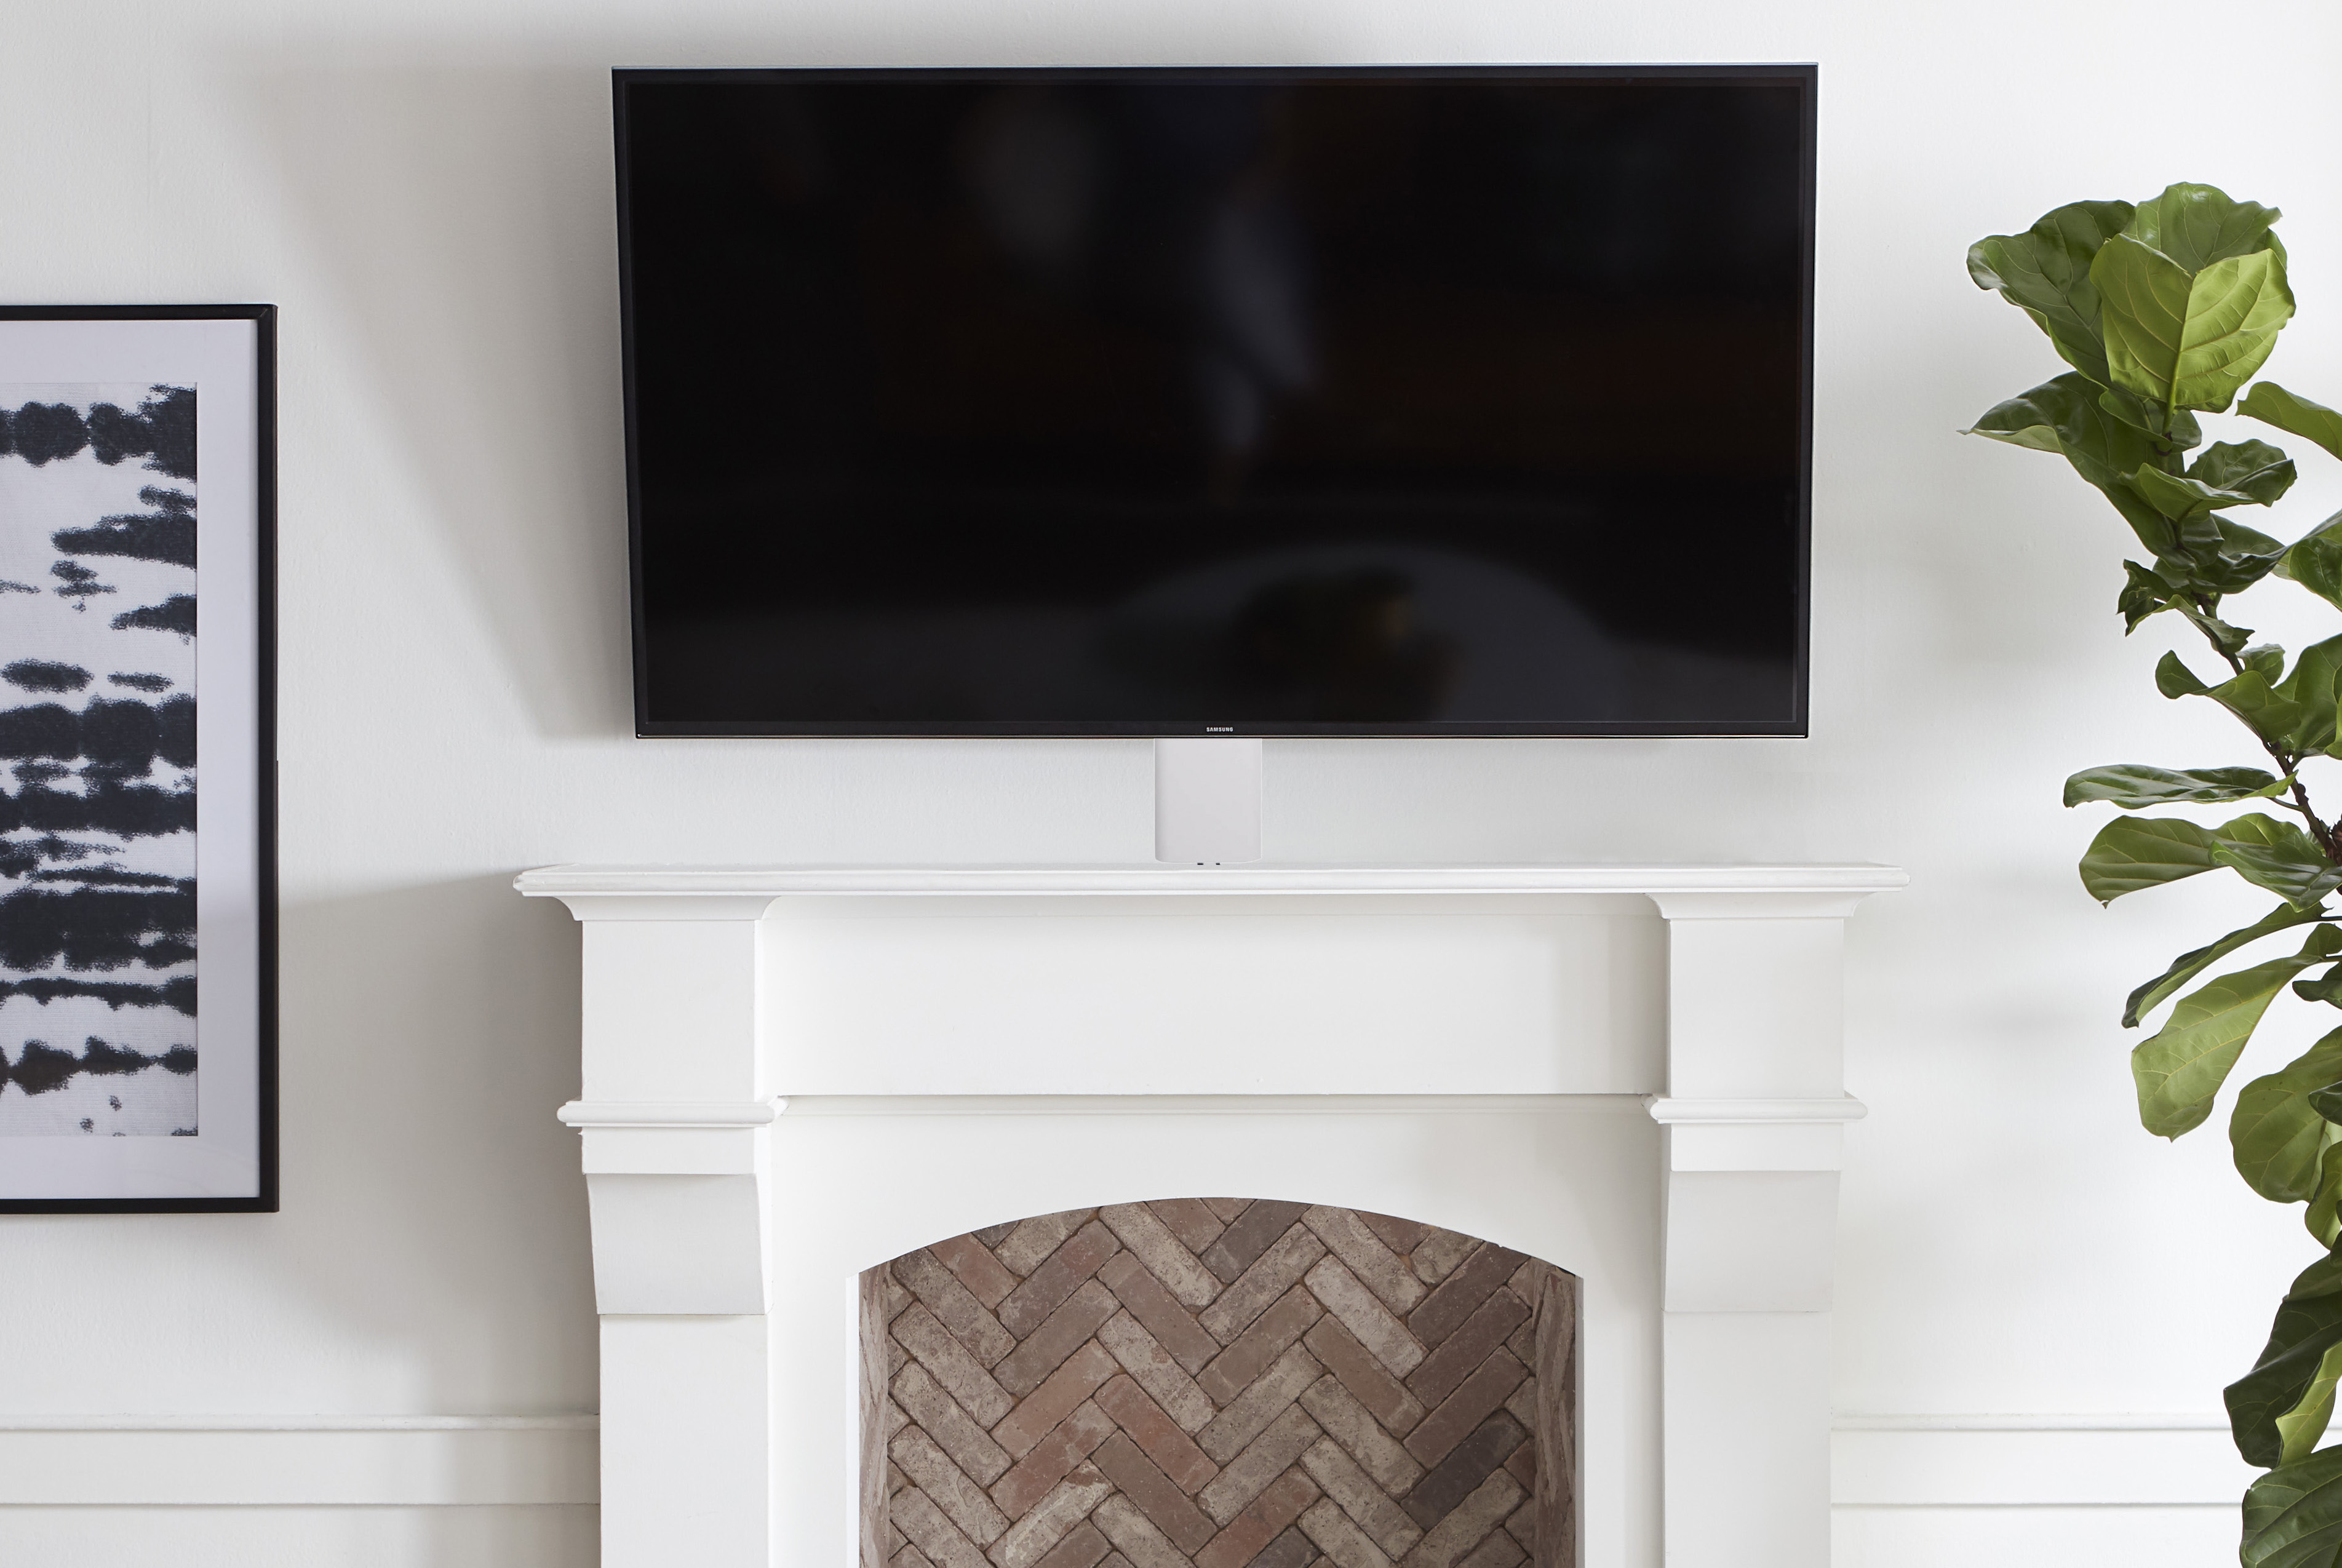 Mounting A Tv Over Fireplace How, How To Install A Tv On Fireplace